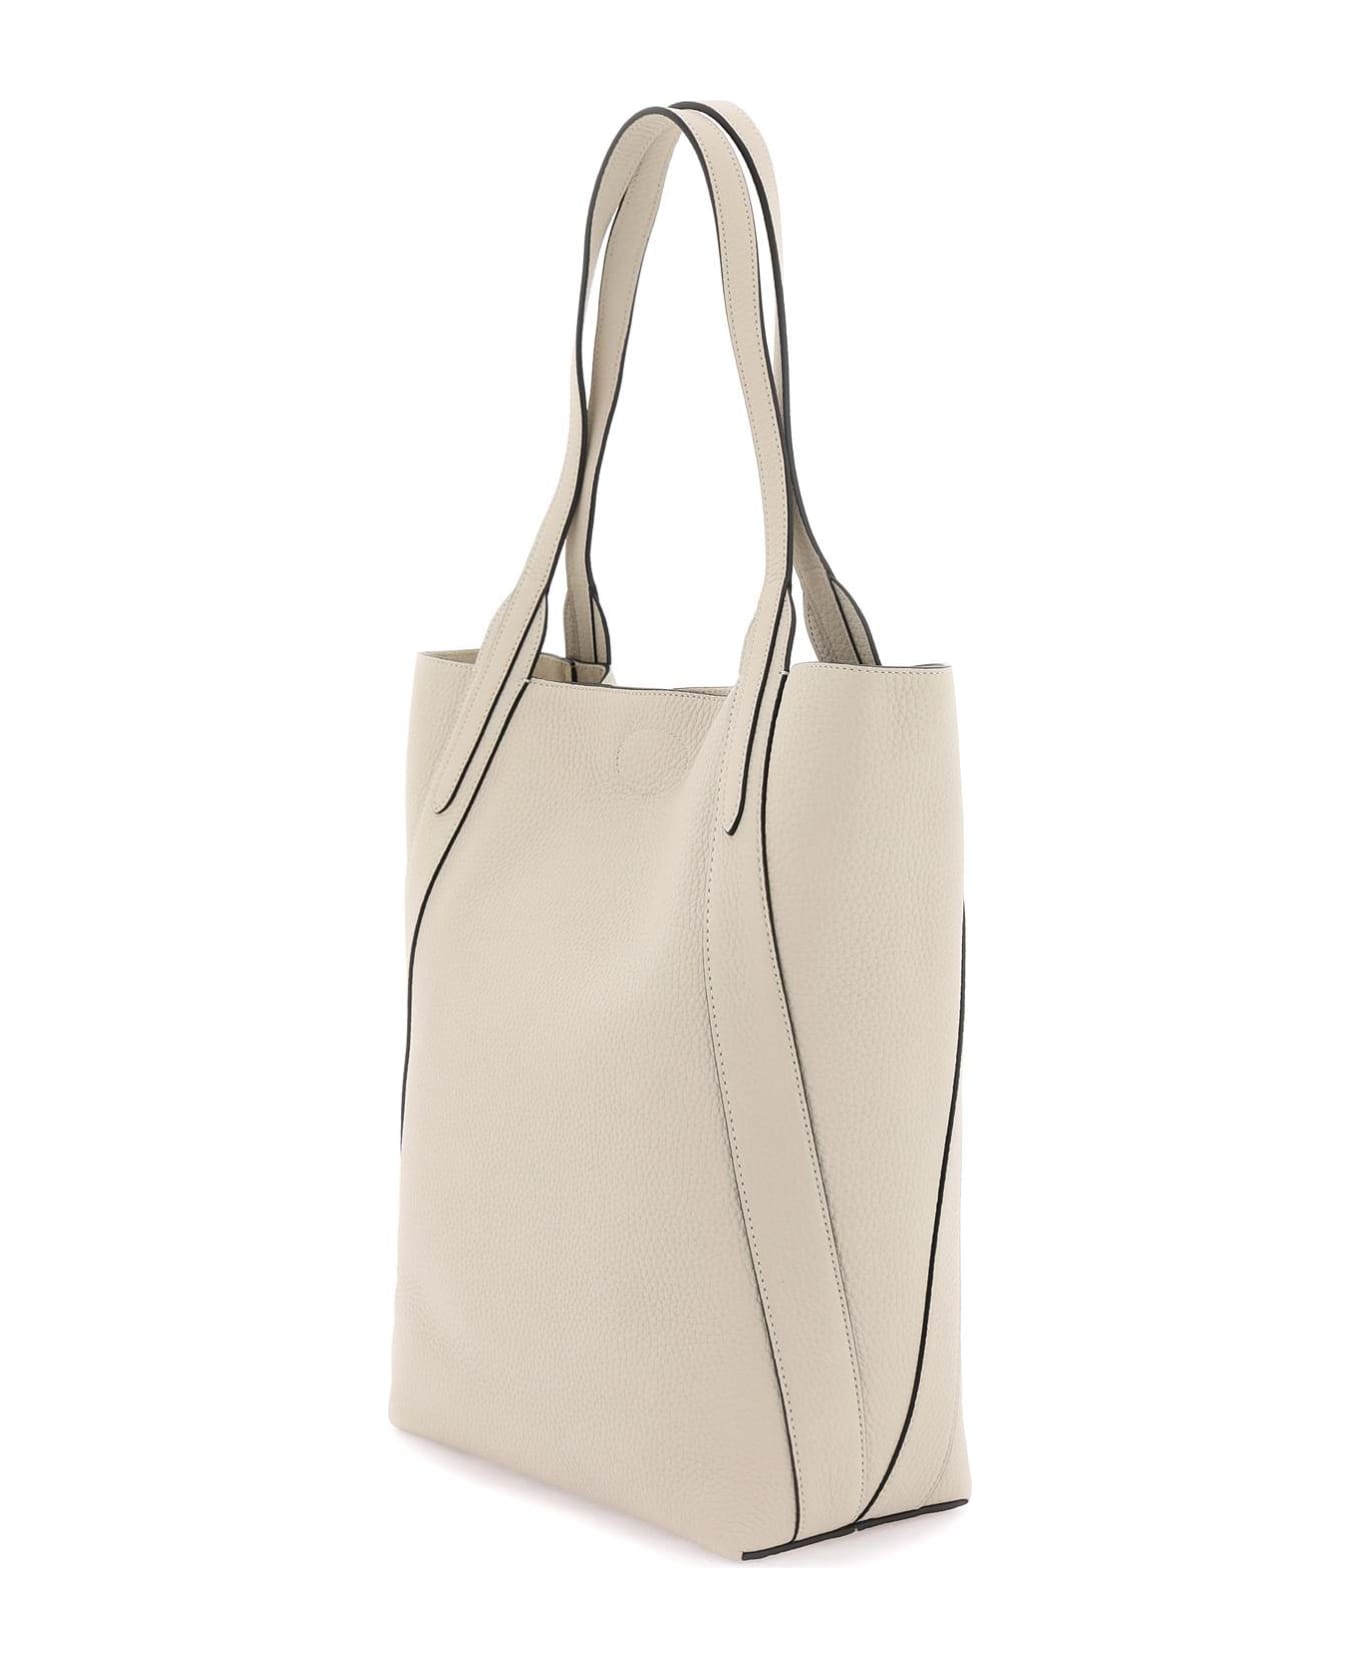 Mulberry Grained Leather Bayswater Tote Bag - CHALK